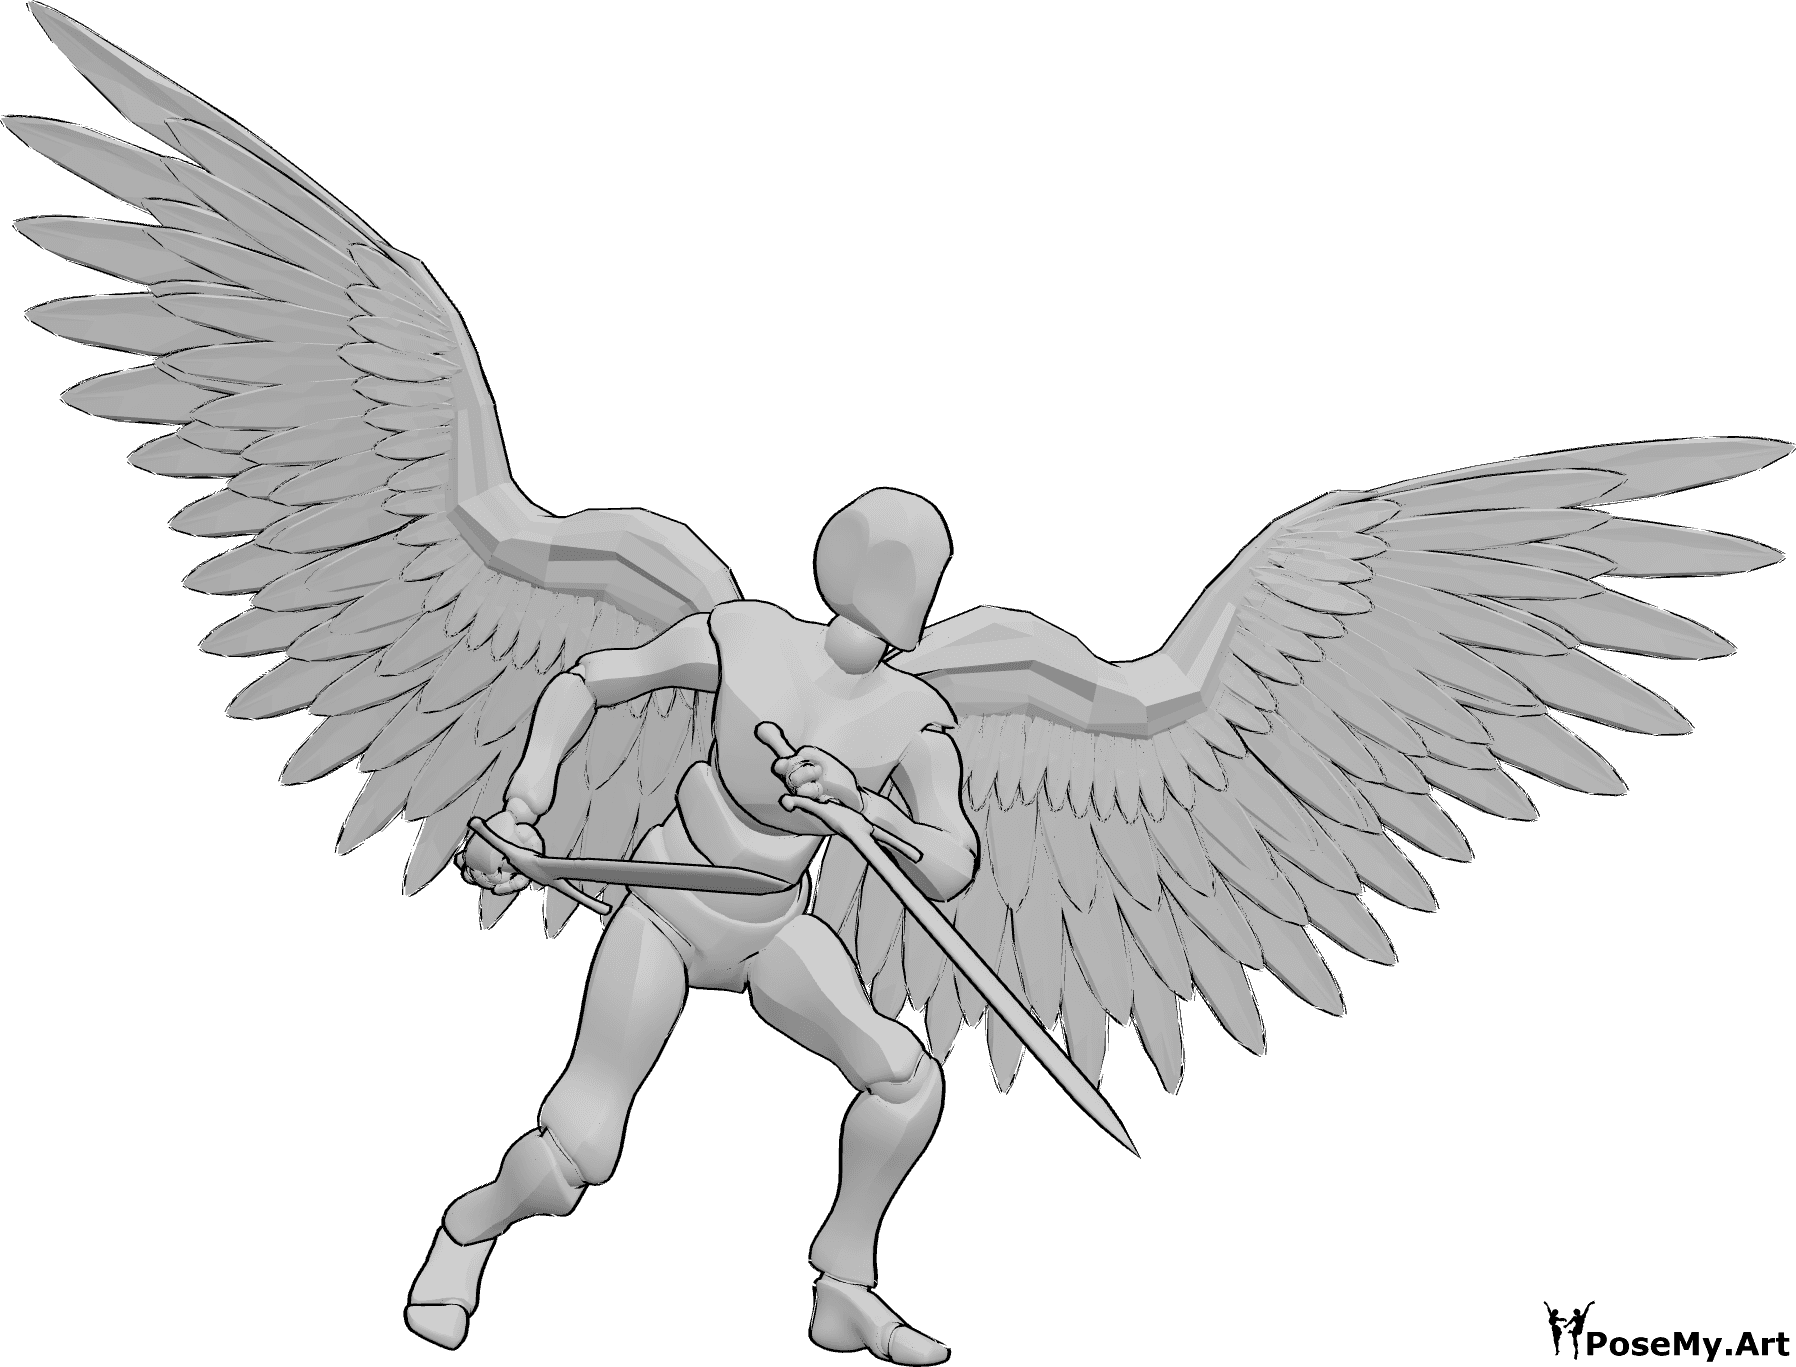 Pose Reference- Male angel swords pose - Male angel is standing and holding two great swords, ready to fight pose